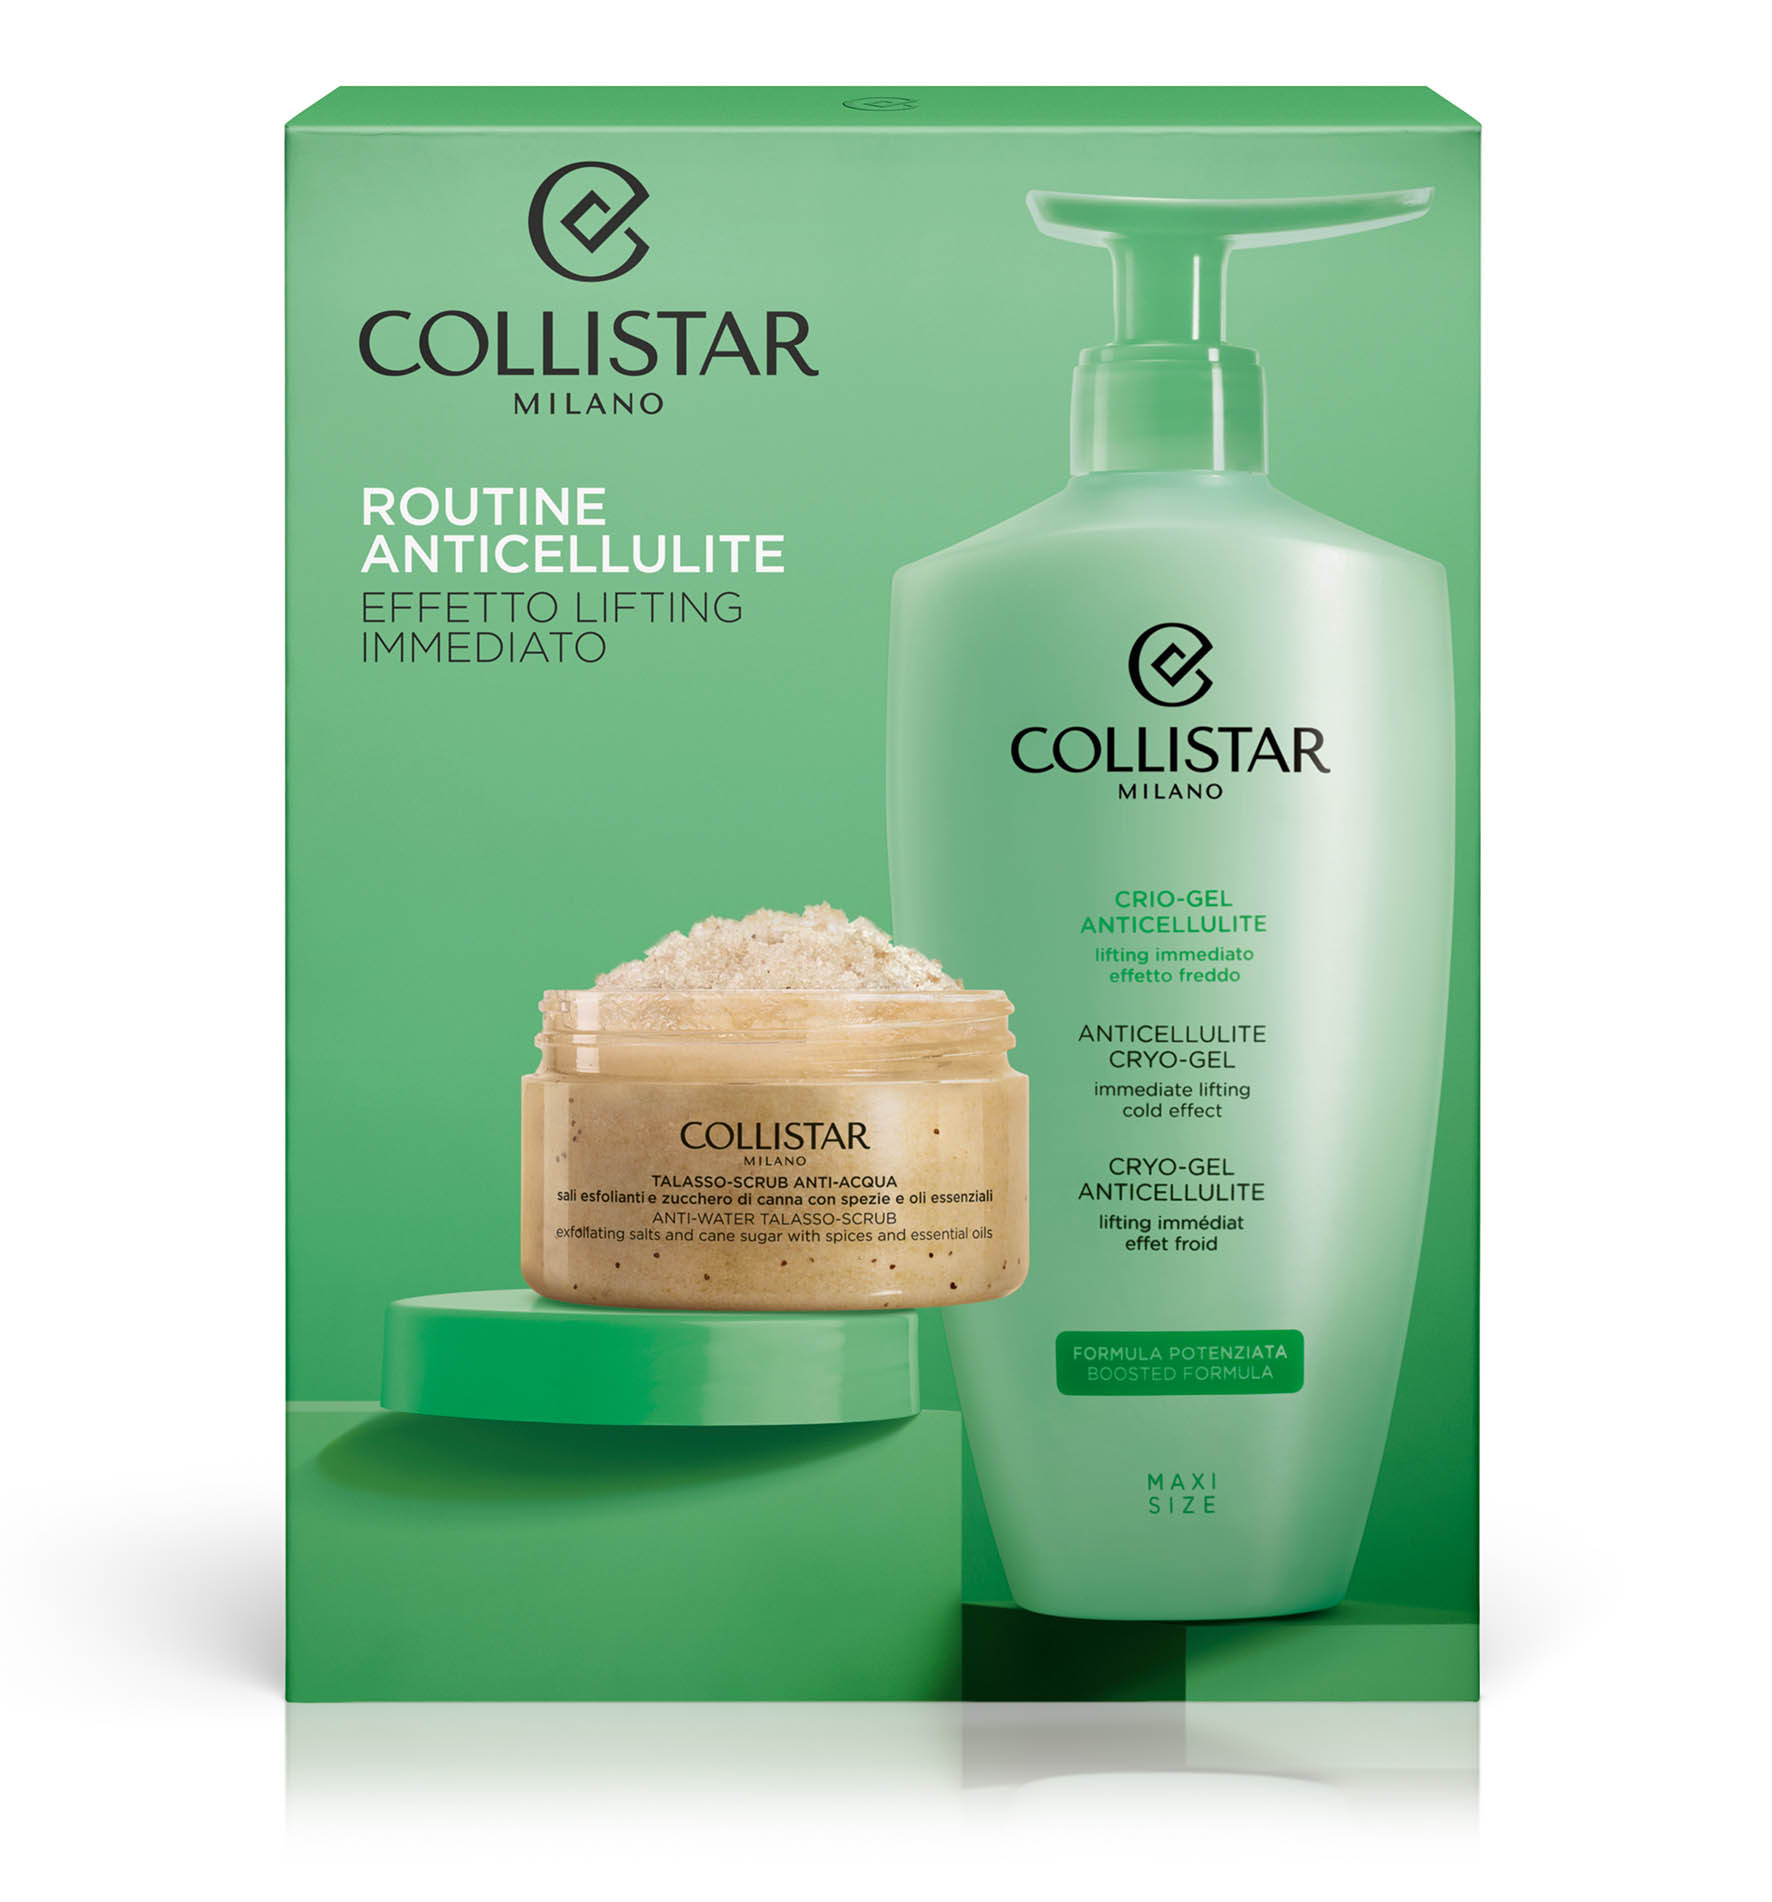 ANTICELLULITE ROUTINE IMMEDIATE LIFTING EFFECT - Giftsets | Collistar - Shop Online Ufficiale